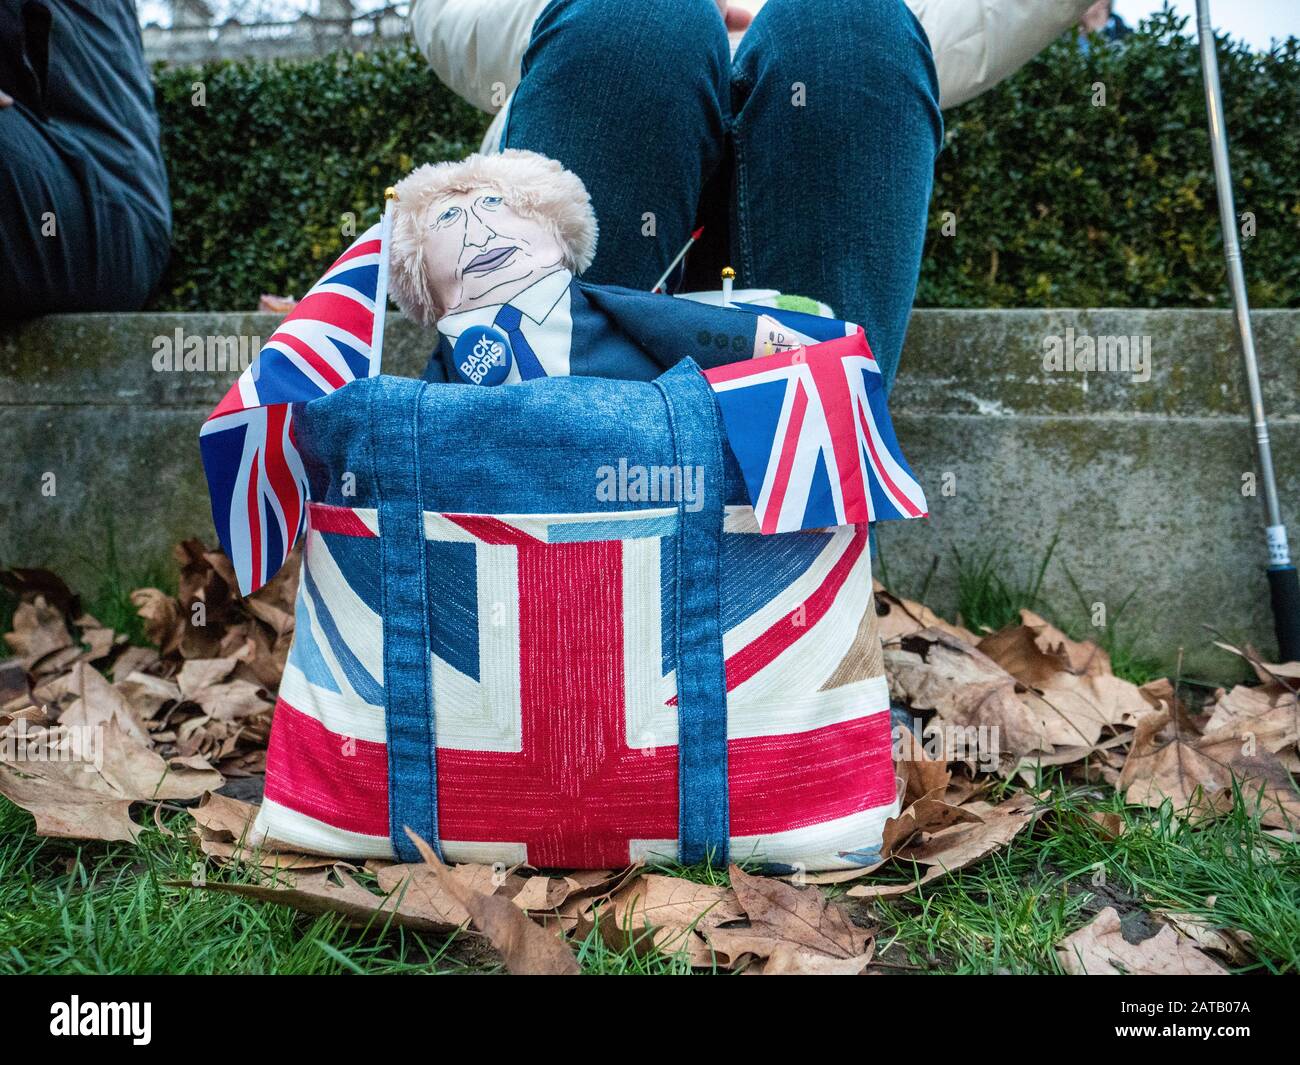 Brexit day 31st Jan 2020 in Parliament square, London, England. A Boris Johnson puppet/doll peers out of a handbag. Stock Photo